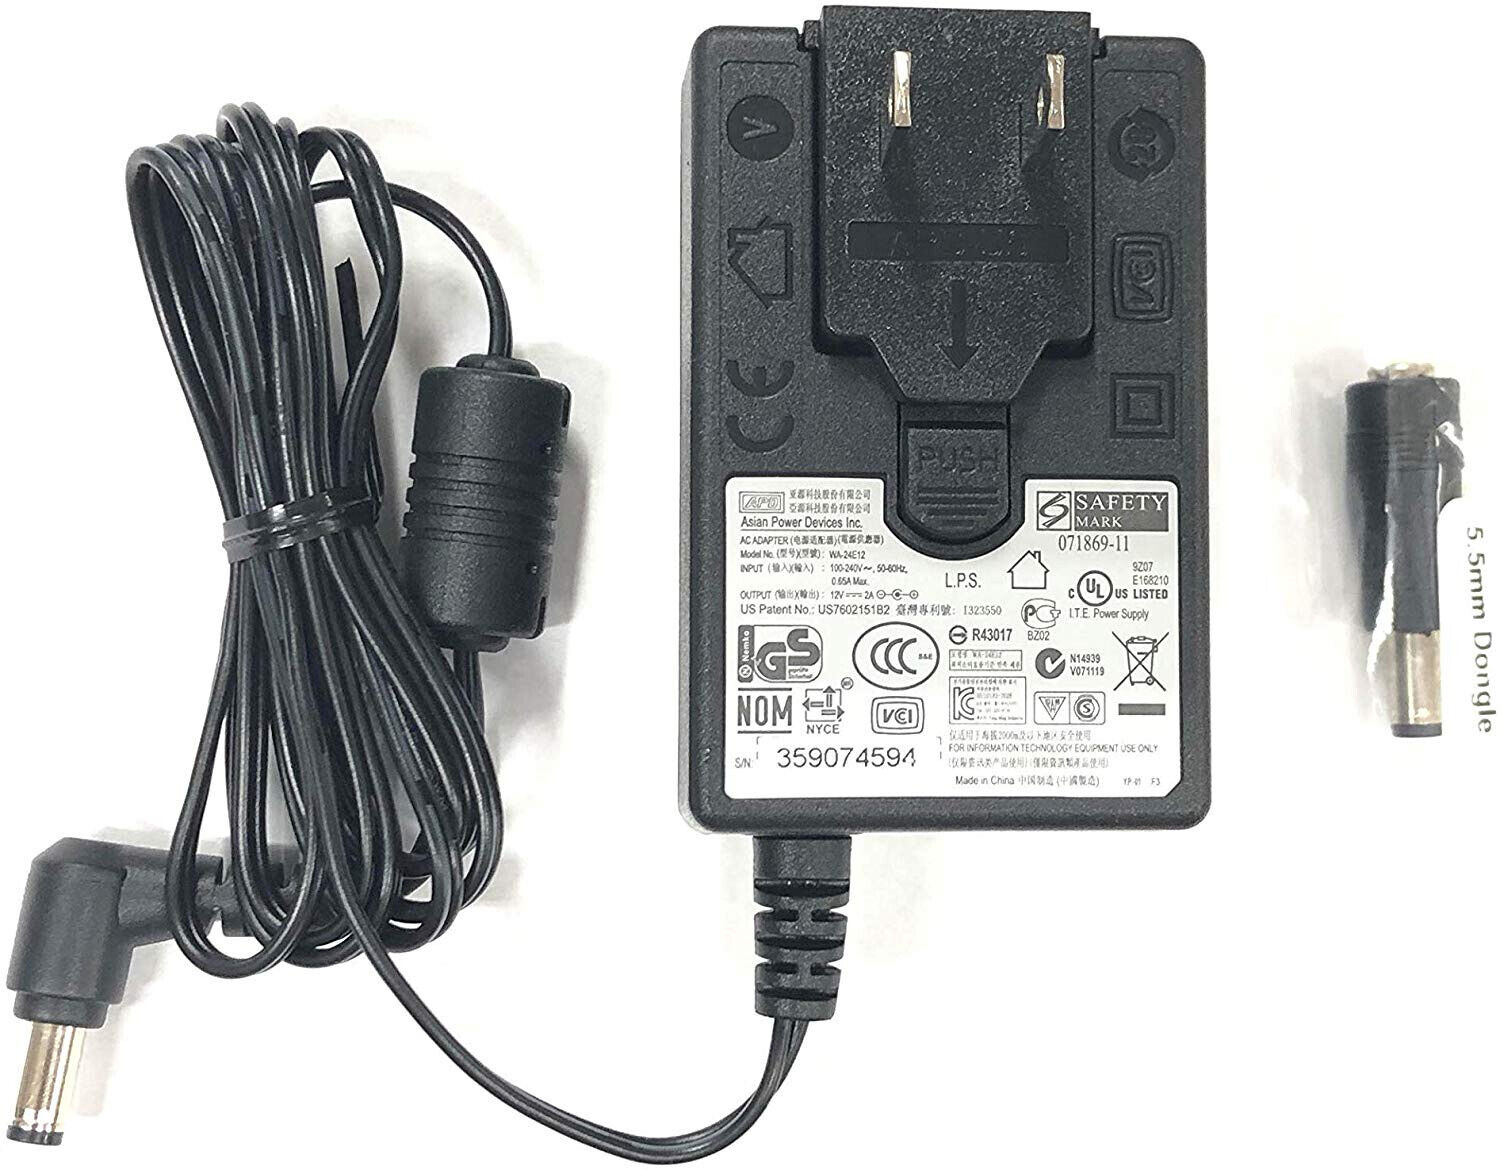 Original APD 12V AC Power Adapter For WD My Book World Edition II:WD40000H2NC